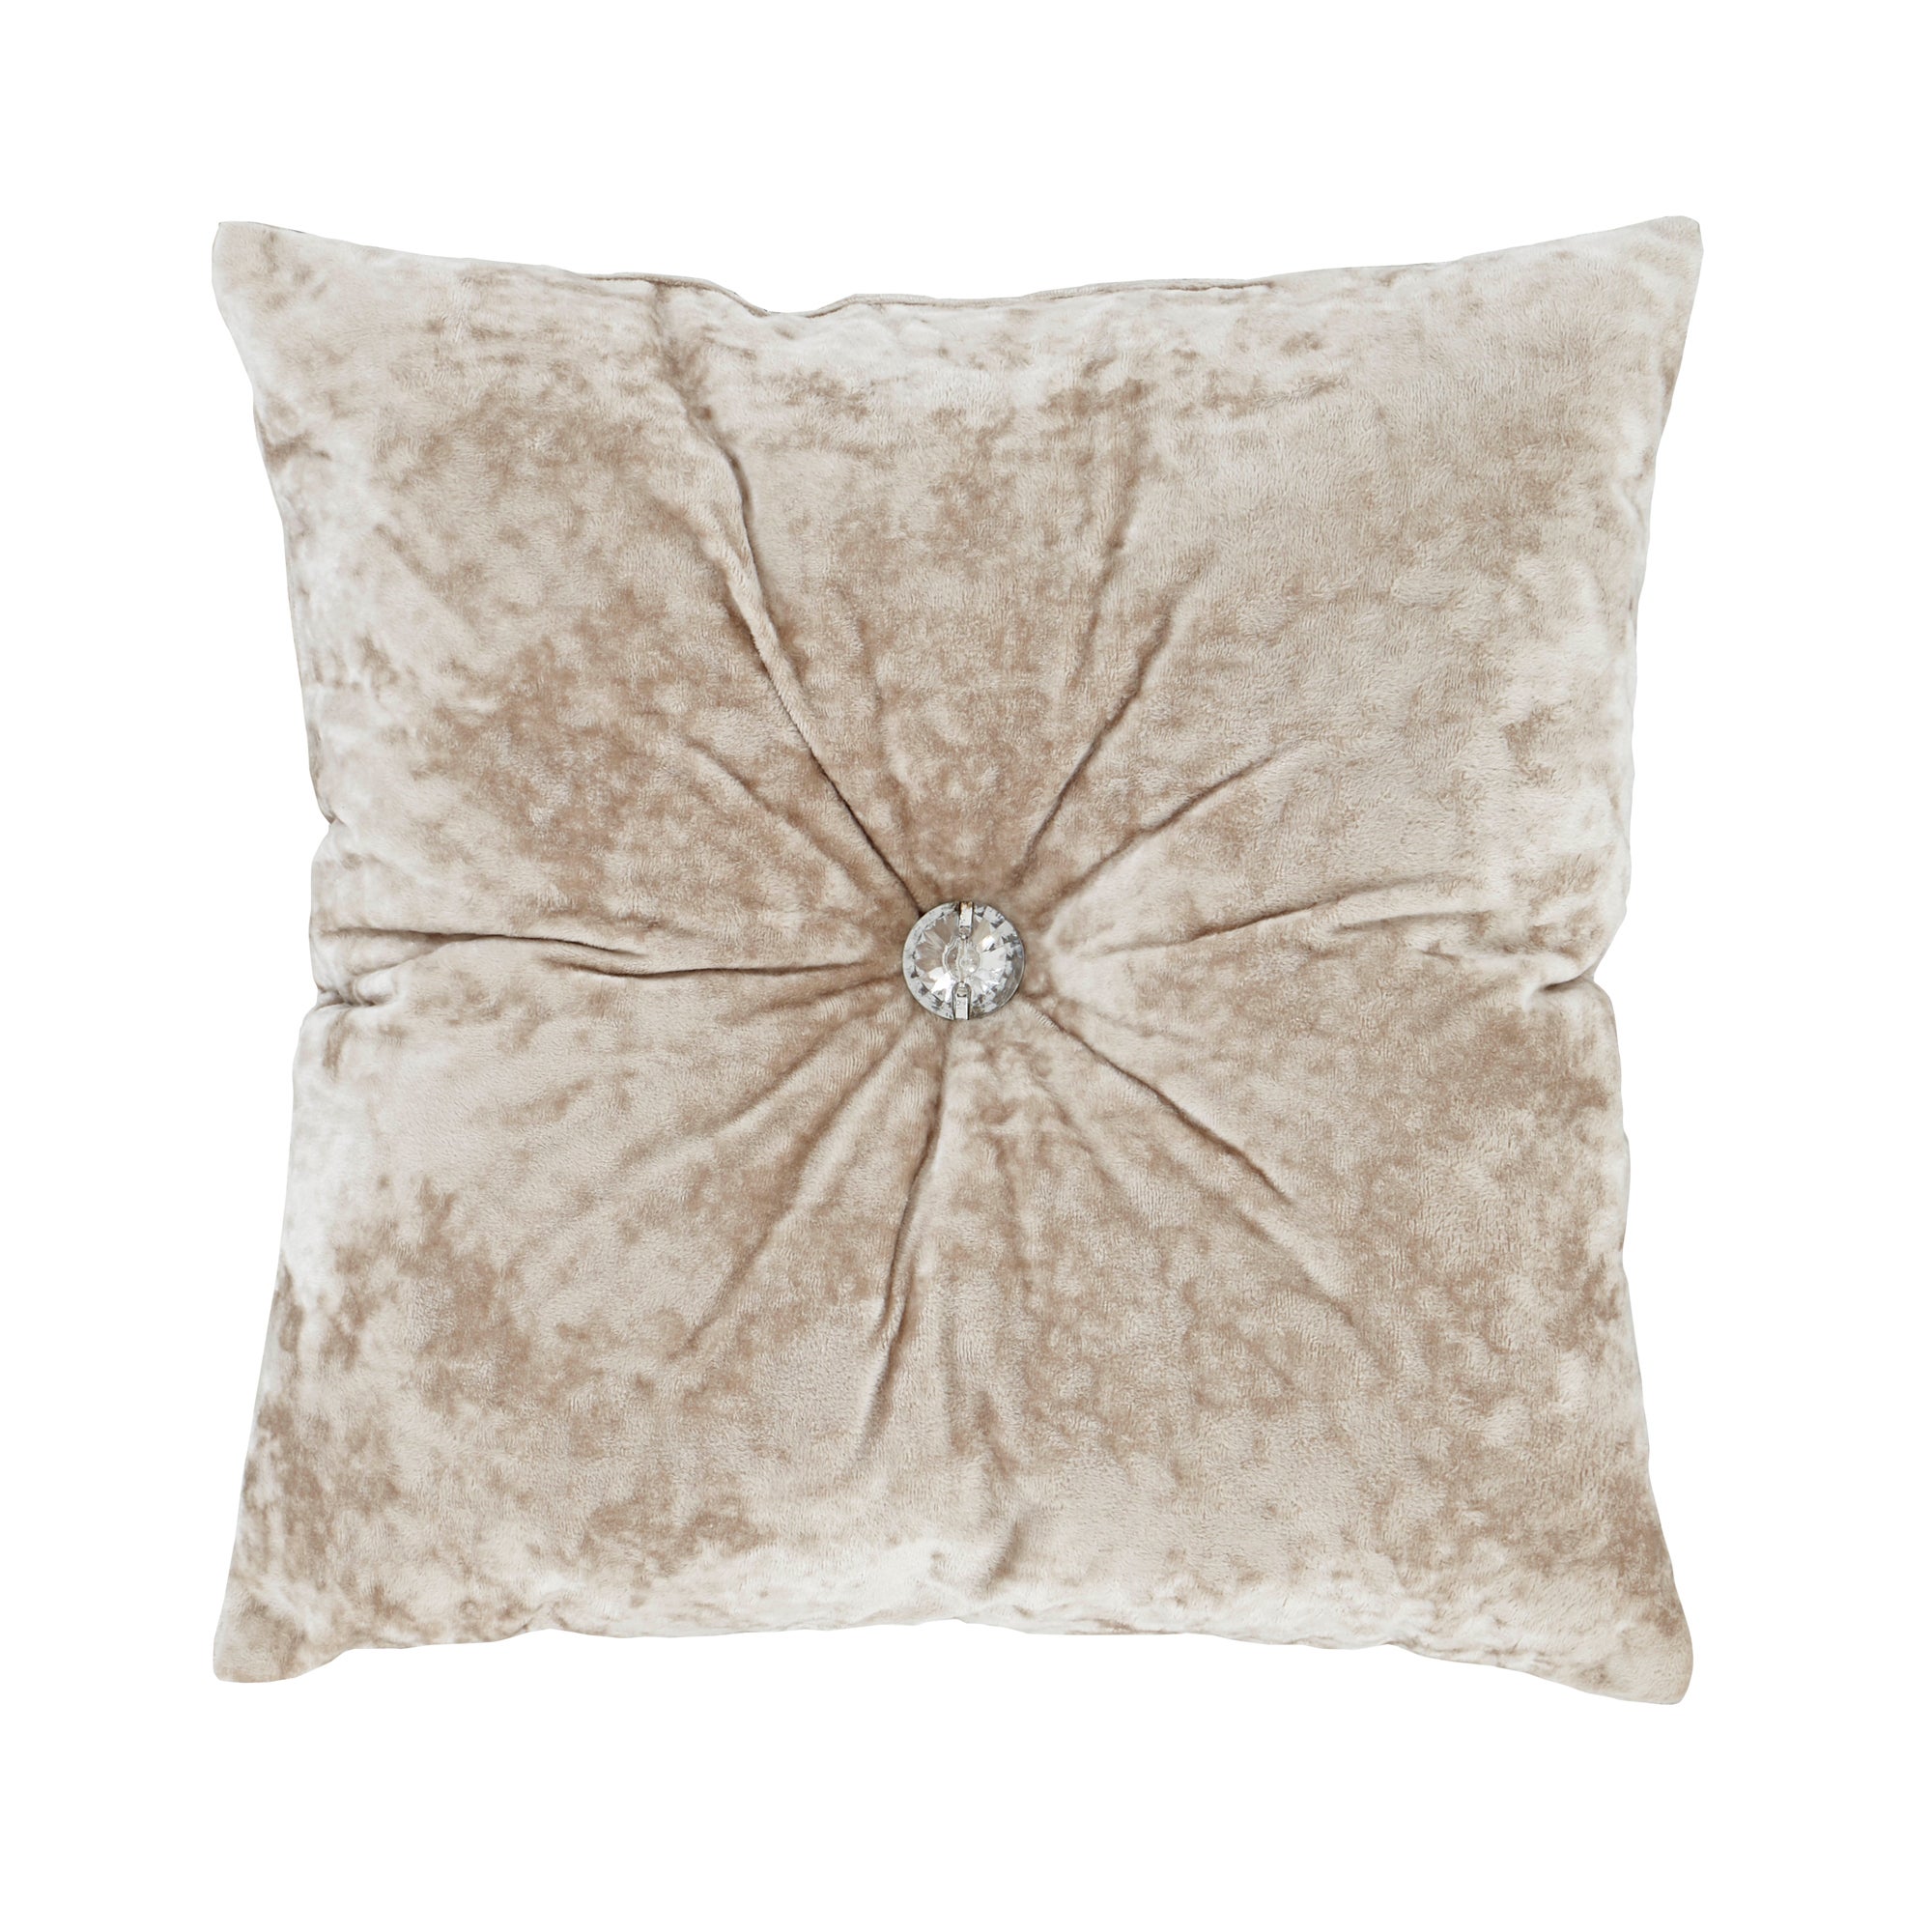 Photos - Pillow Catherine Lansfield Natural Crushed Velvet Cushion Beige 